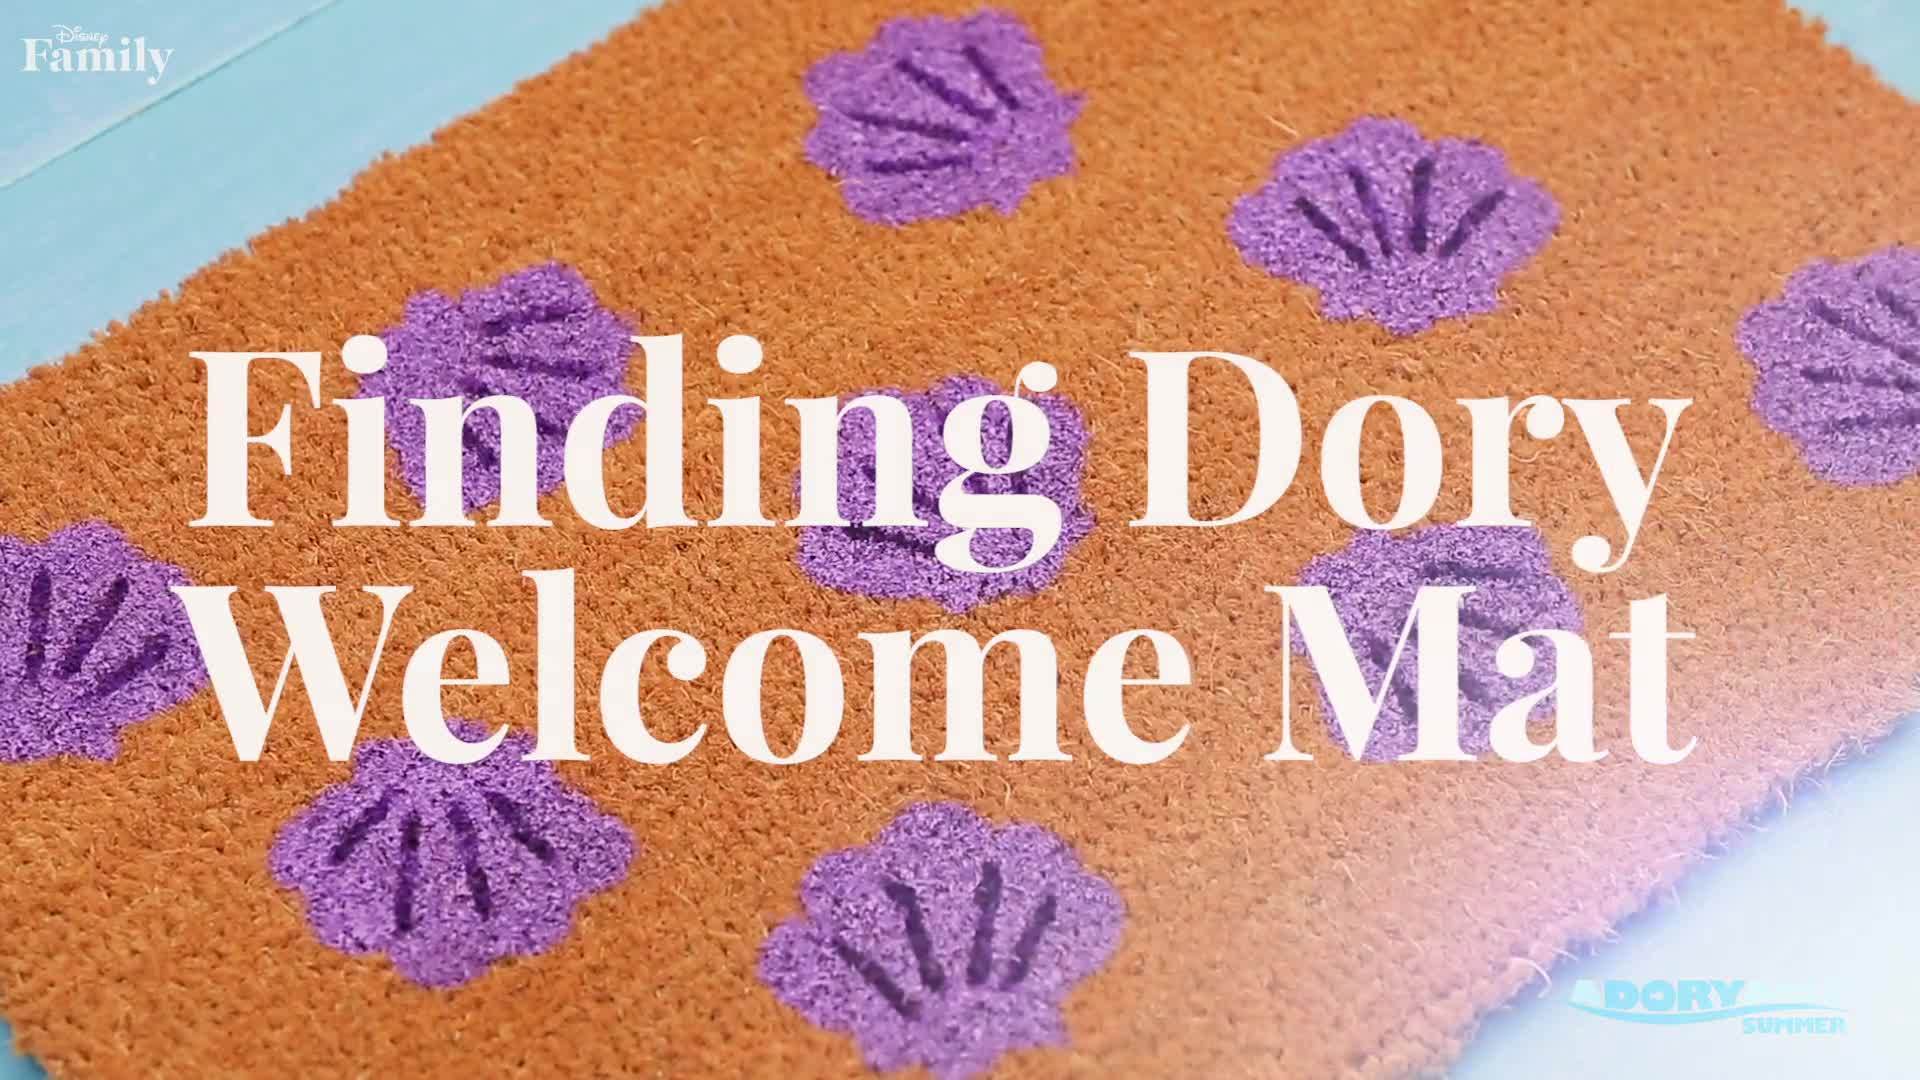 Disney Family: Finding Dory Welcome Mat